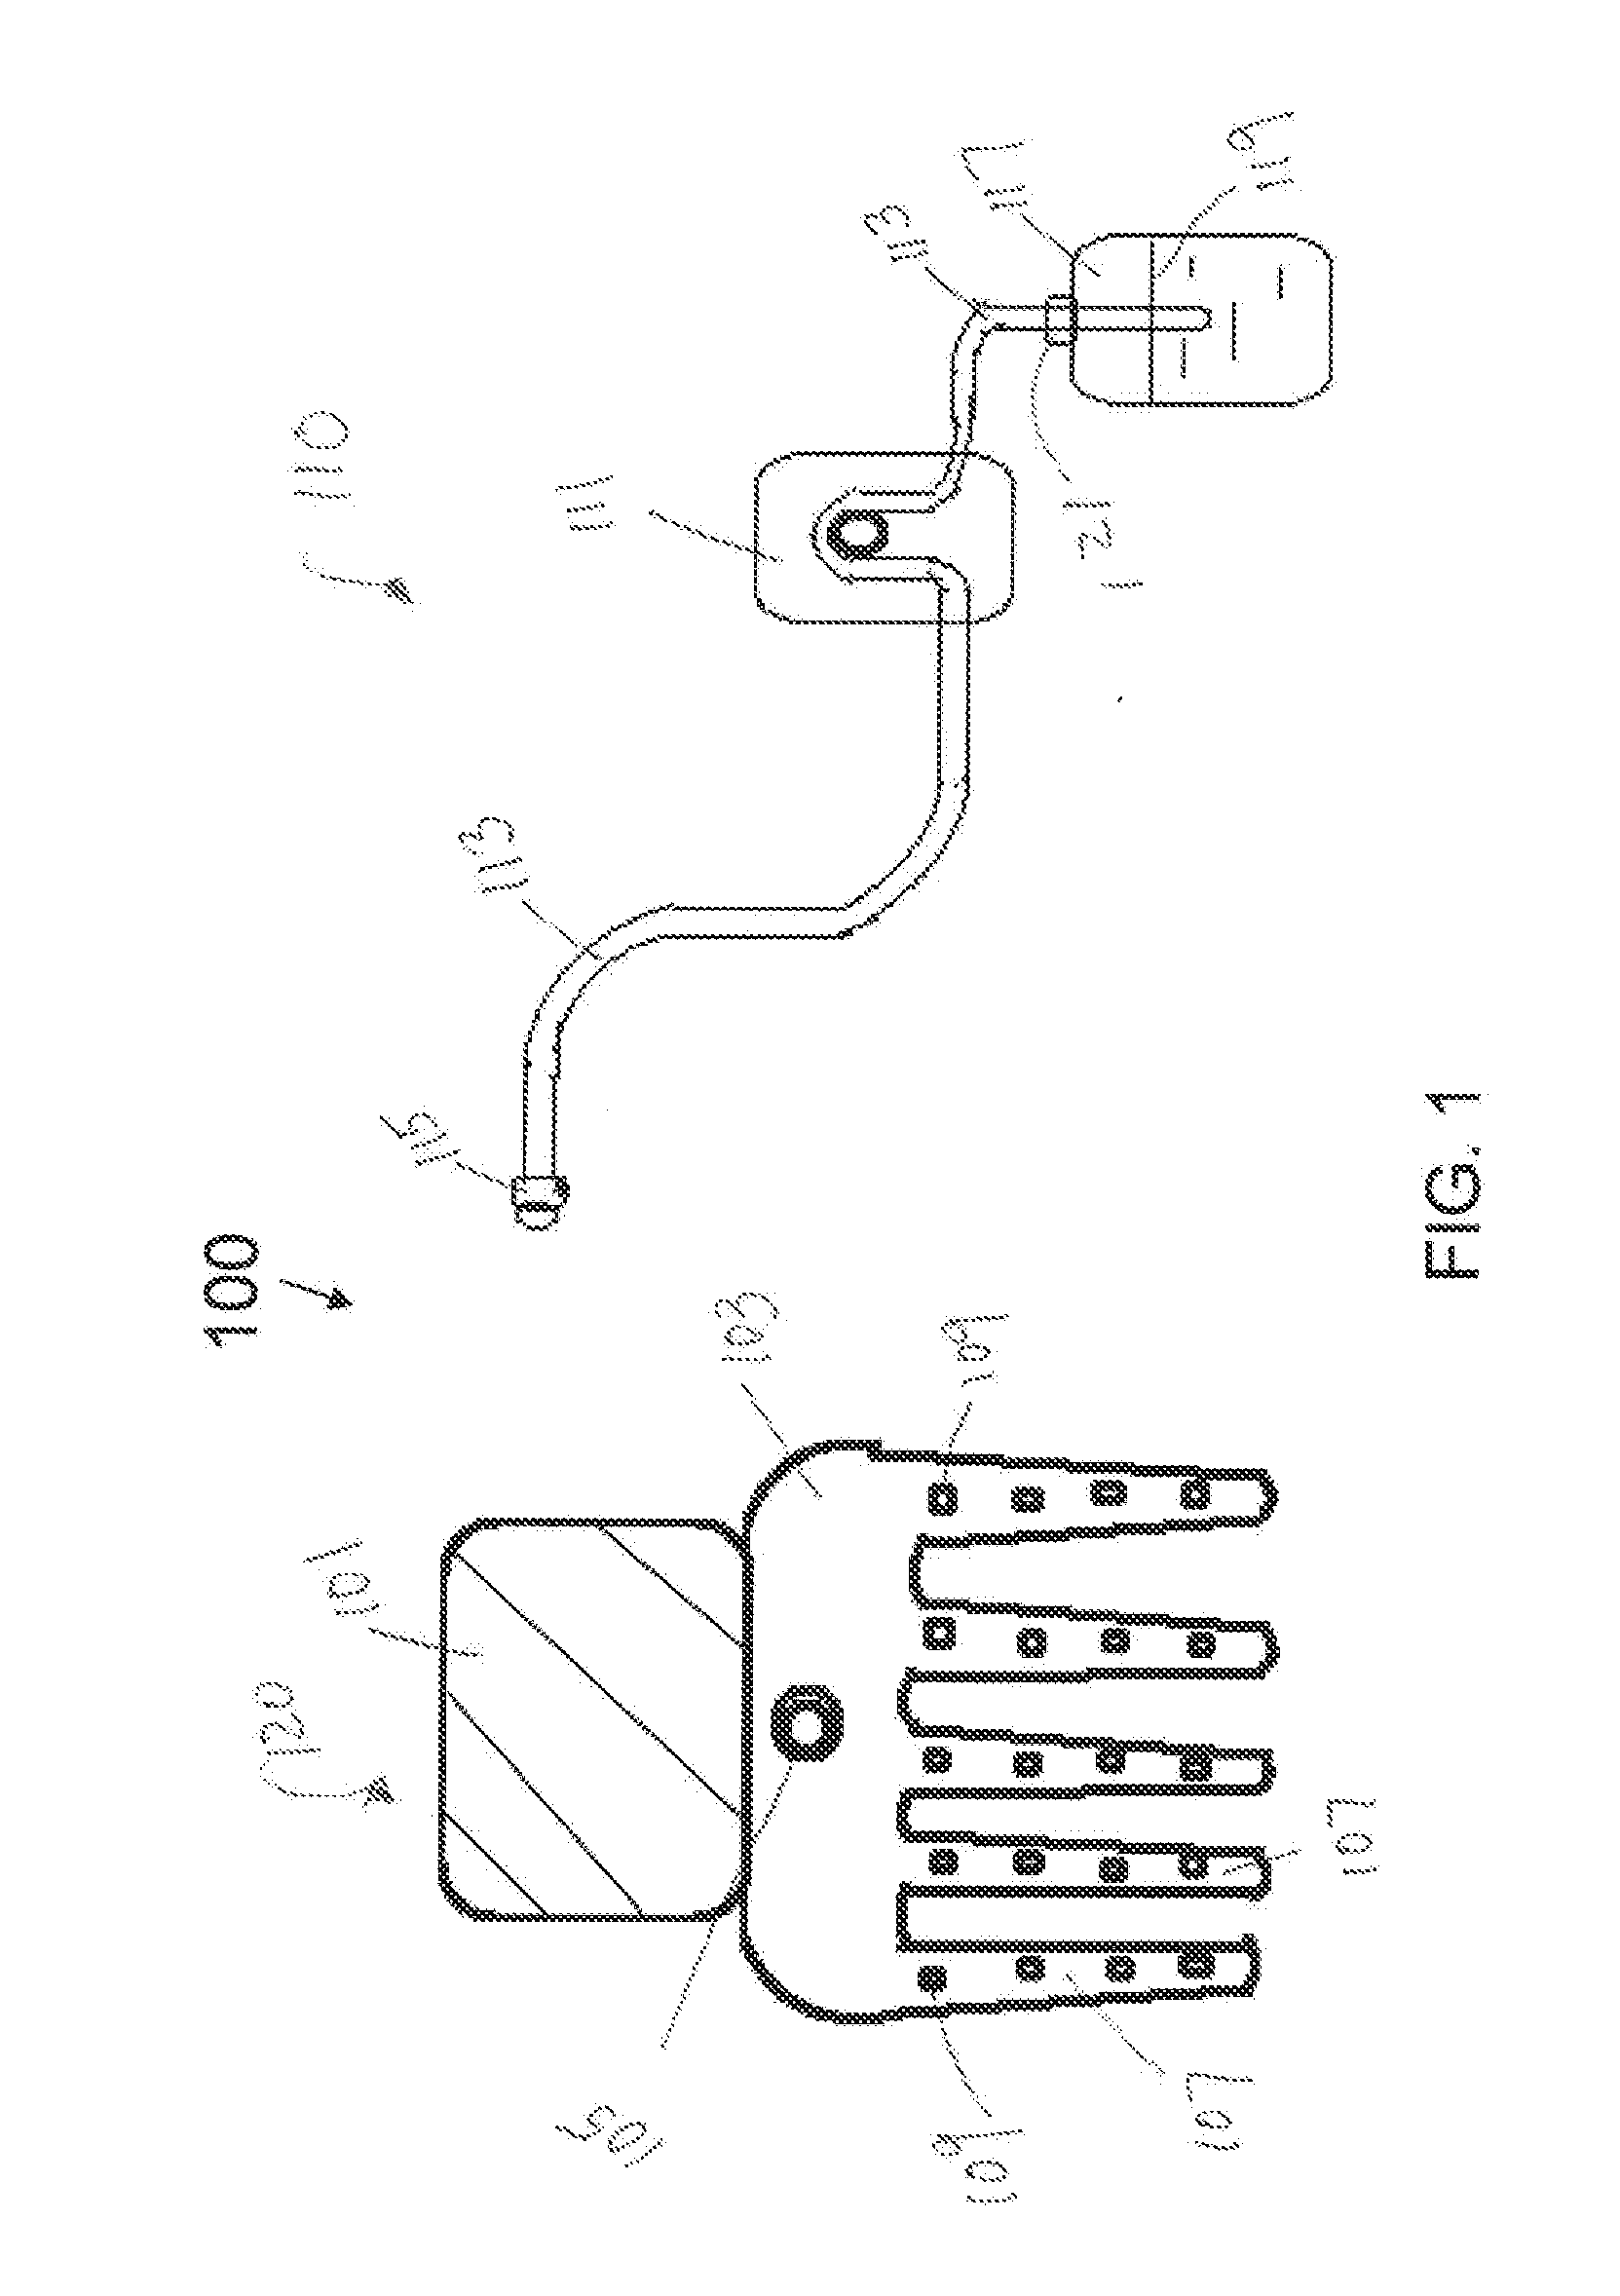 Comb device for hair treatment